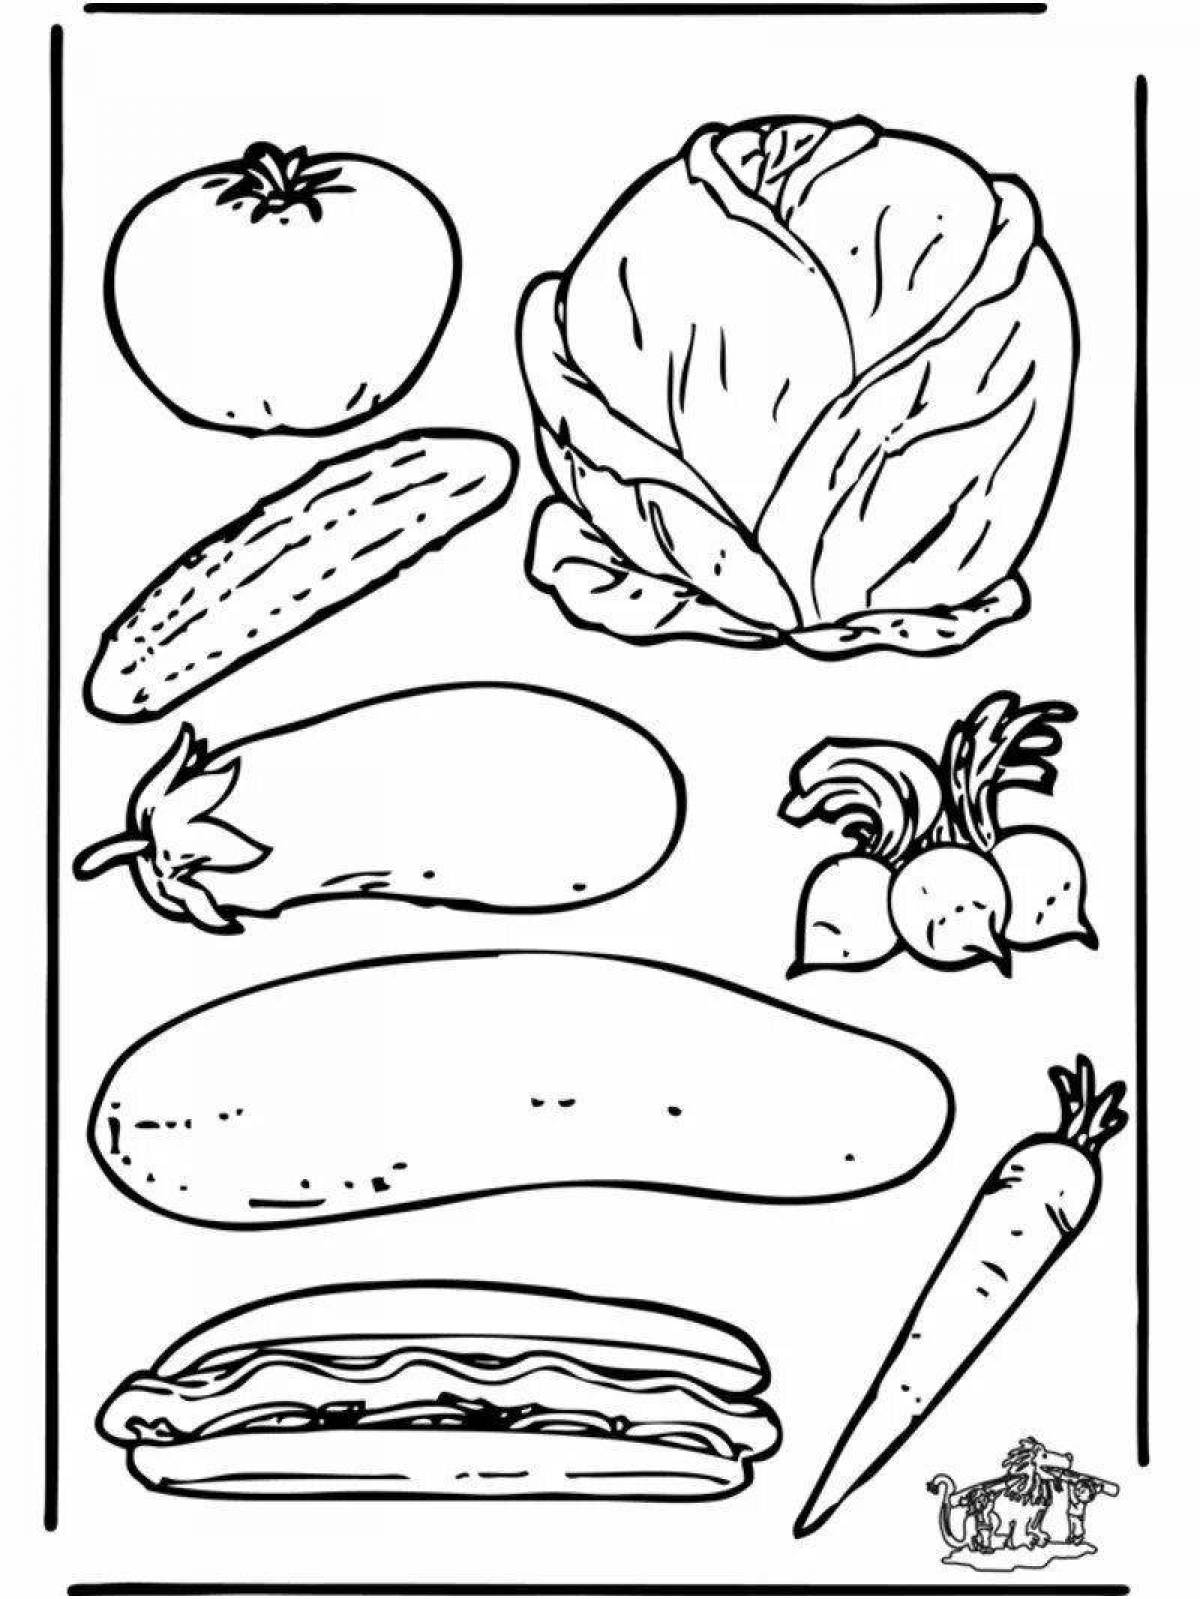 Funny vegetable coloring book for 3-4 year olds